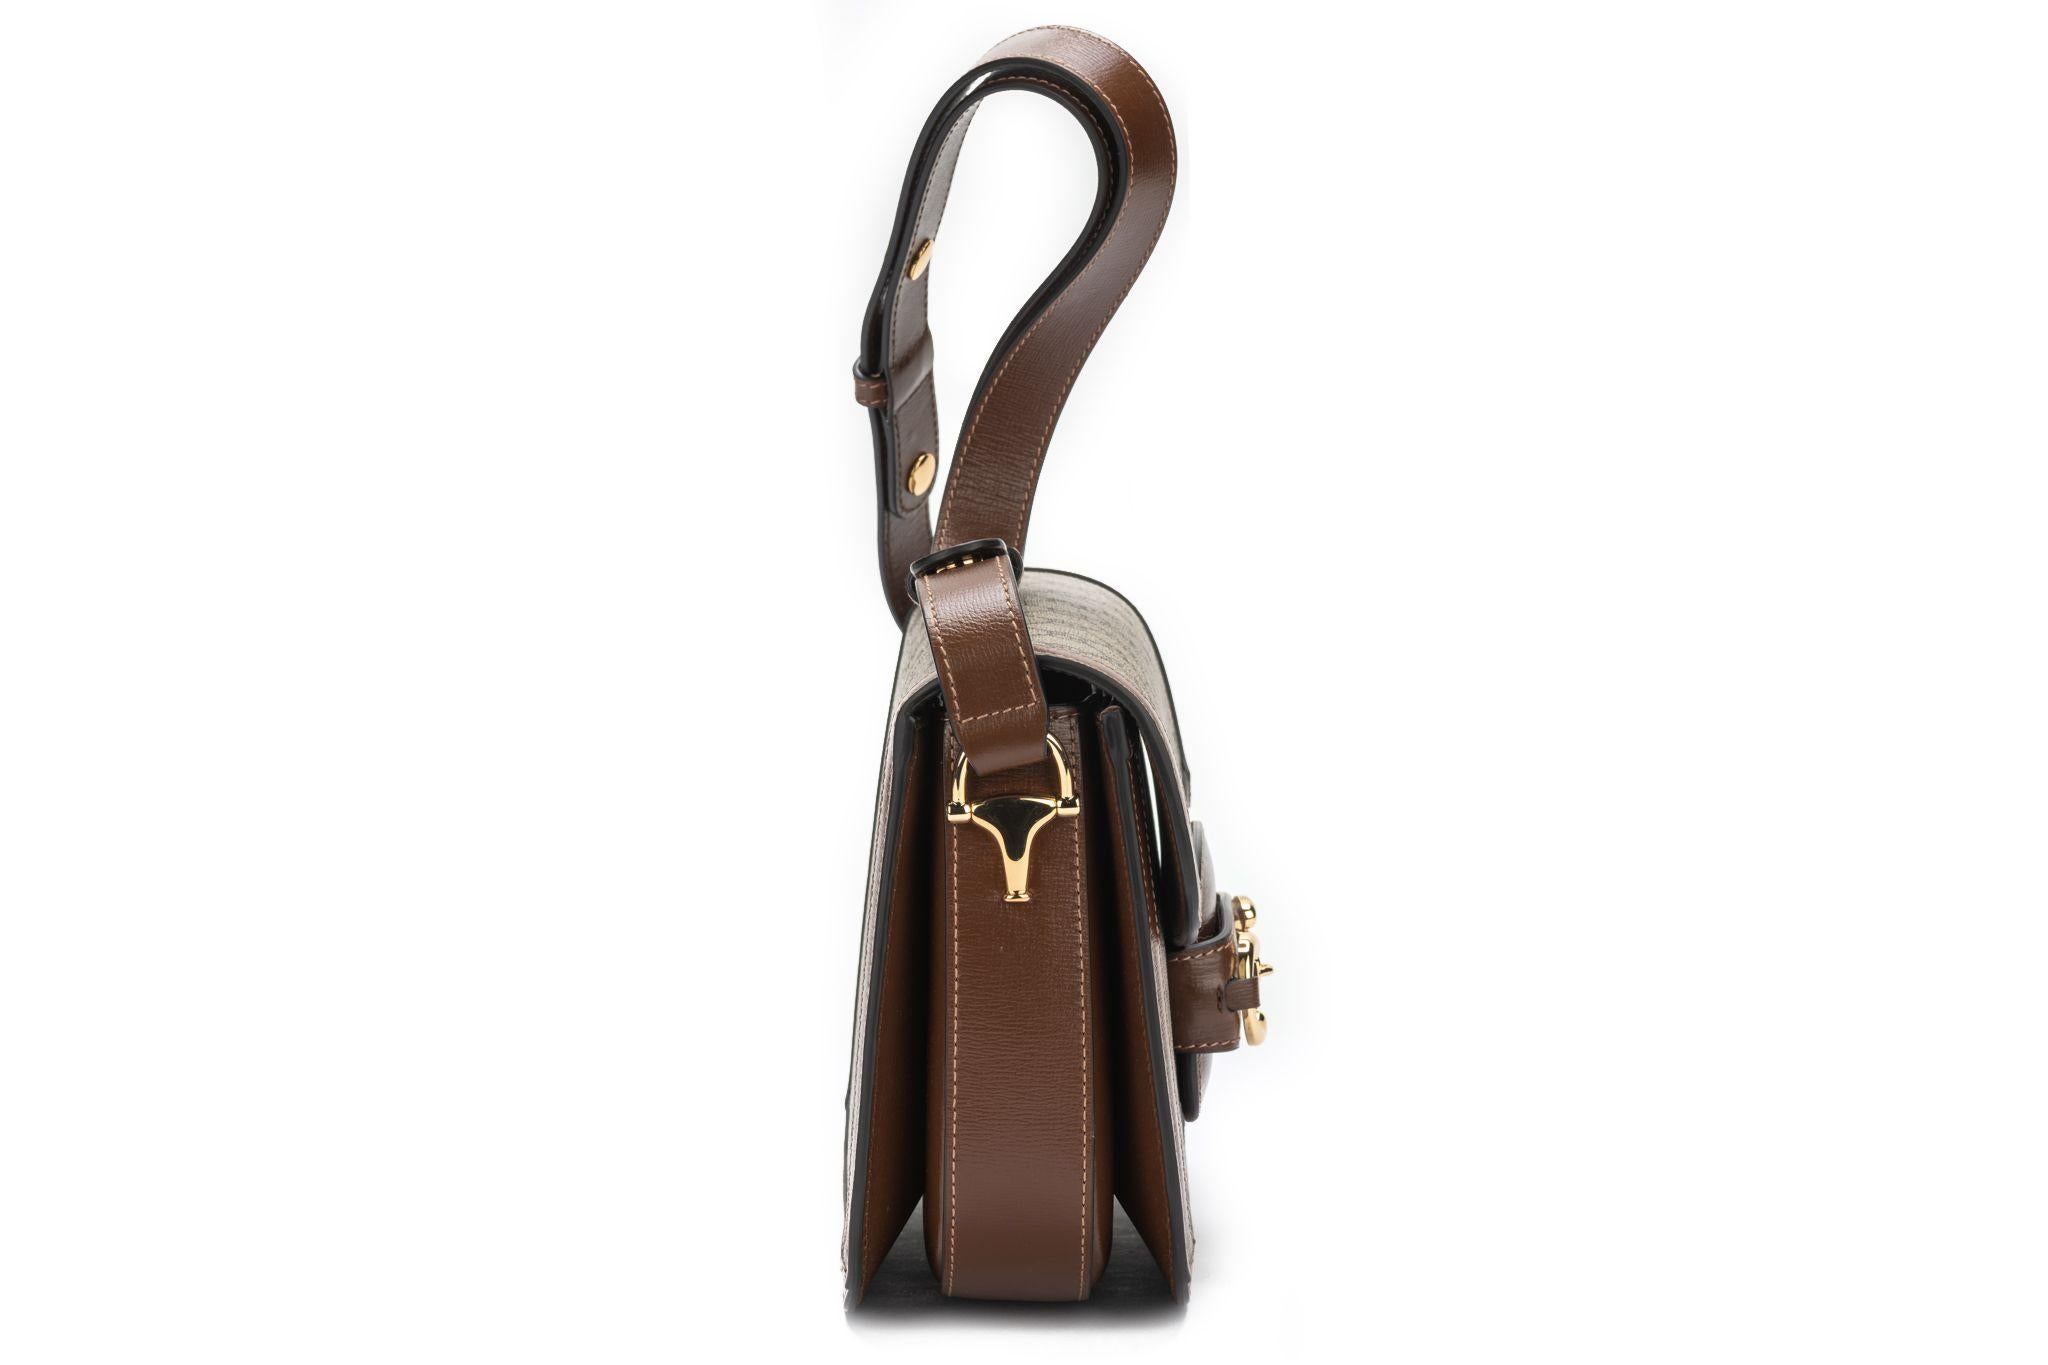 Gucci New Horsebit 1955 Shoulder Bag In New Condition For Sale In West Hollywood, CA